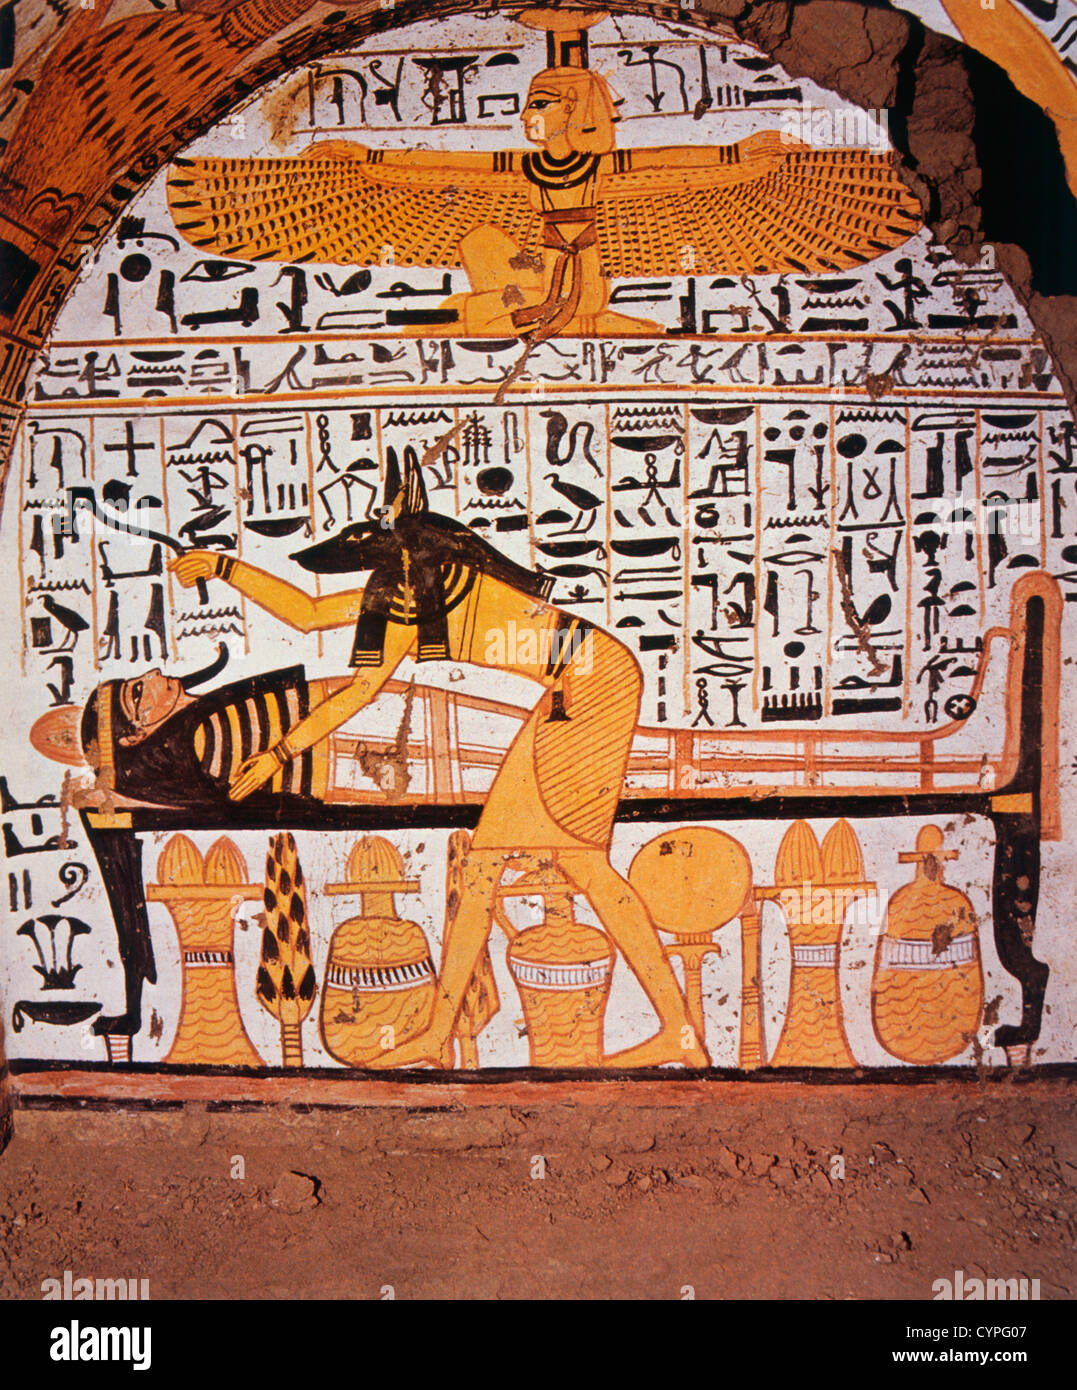 God Anubis Preparing the Dead for its Journey, Thebes, Egypt, Tomb Painting Stock Photo